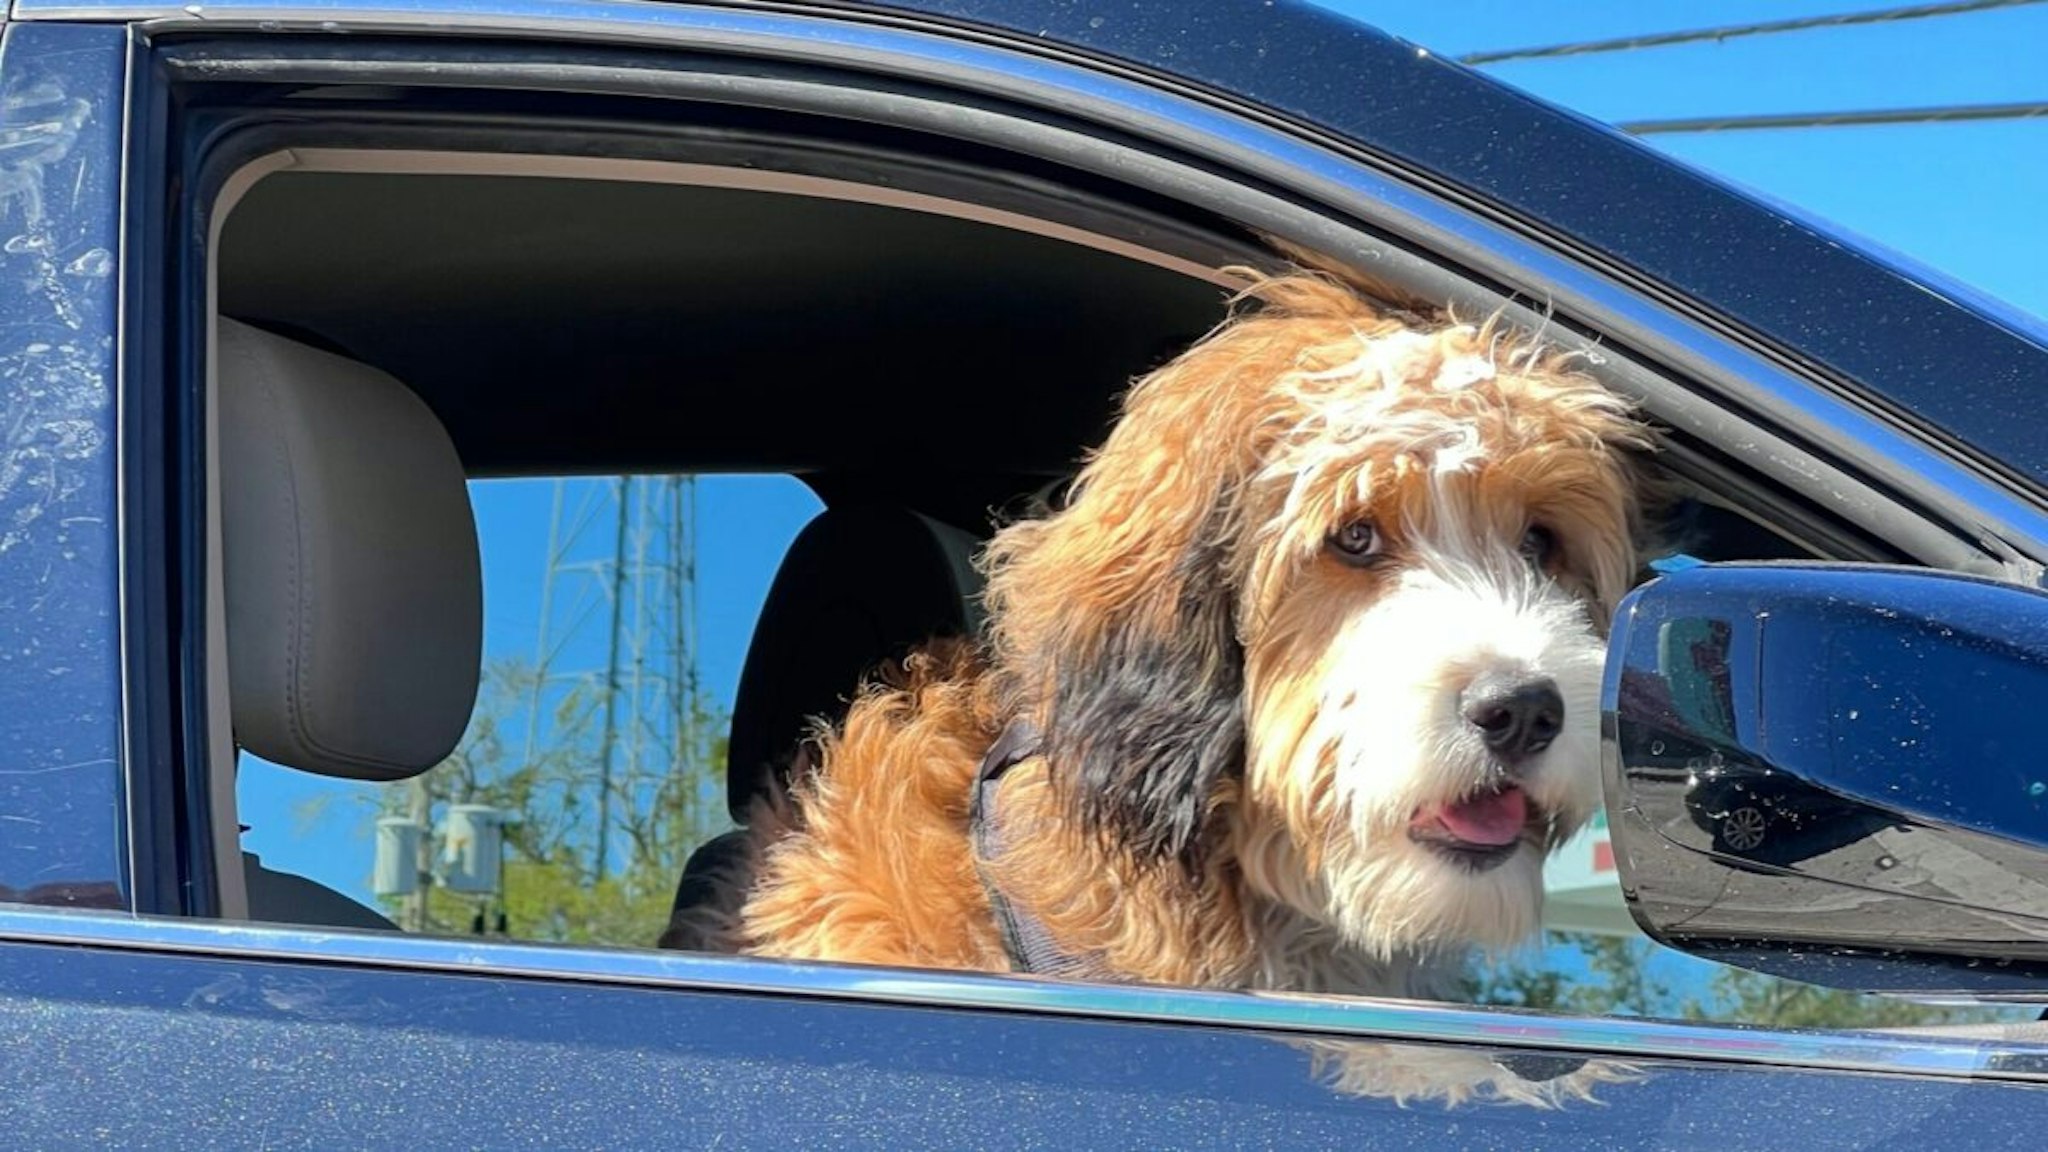 A dog looks out of the passenger side window of a car in Orlando on Feb. 13, 2023. A proposed ban on people driving with their dogs&apos; heads outside car windows has drawn a backlash.